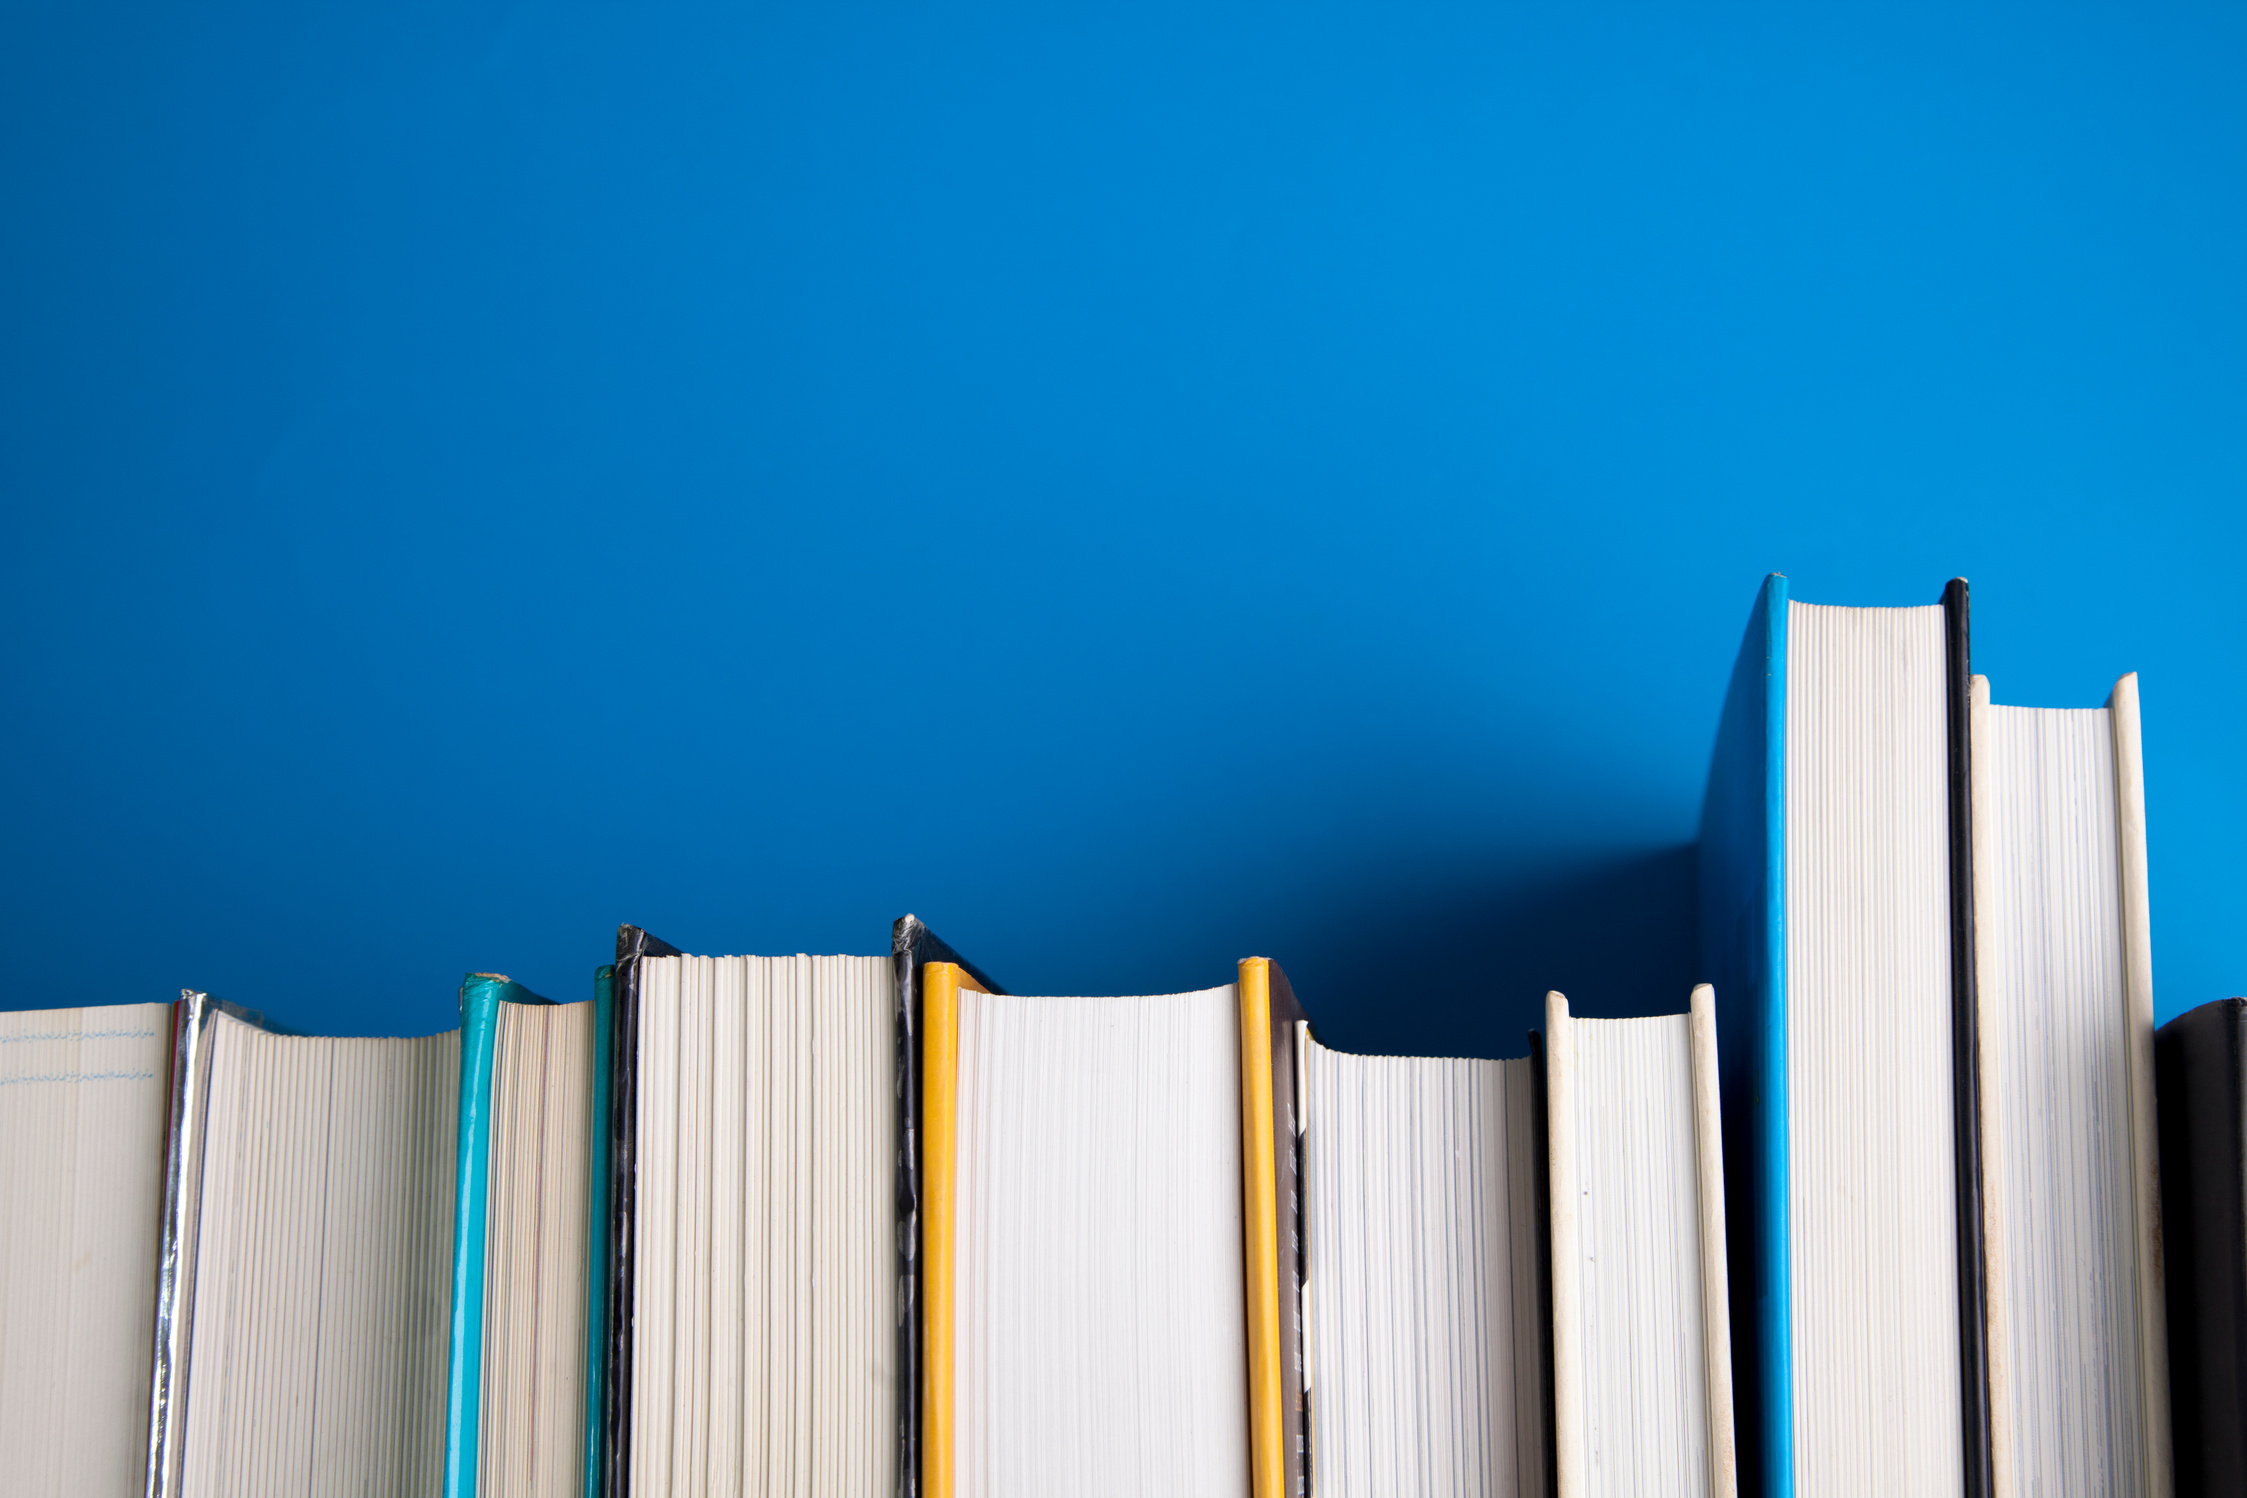 Stack of books on blue background.